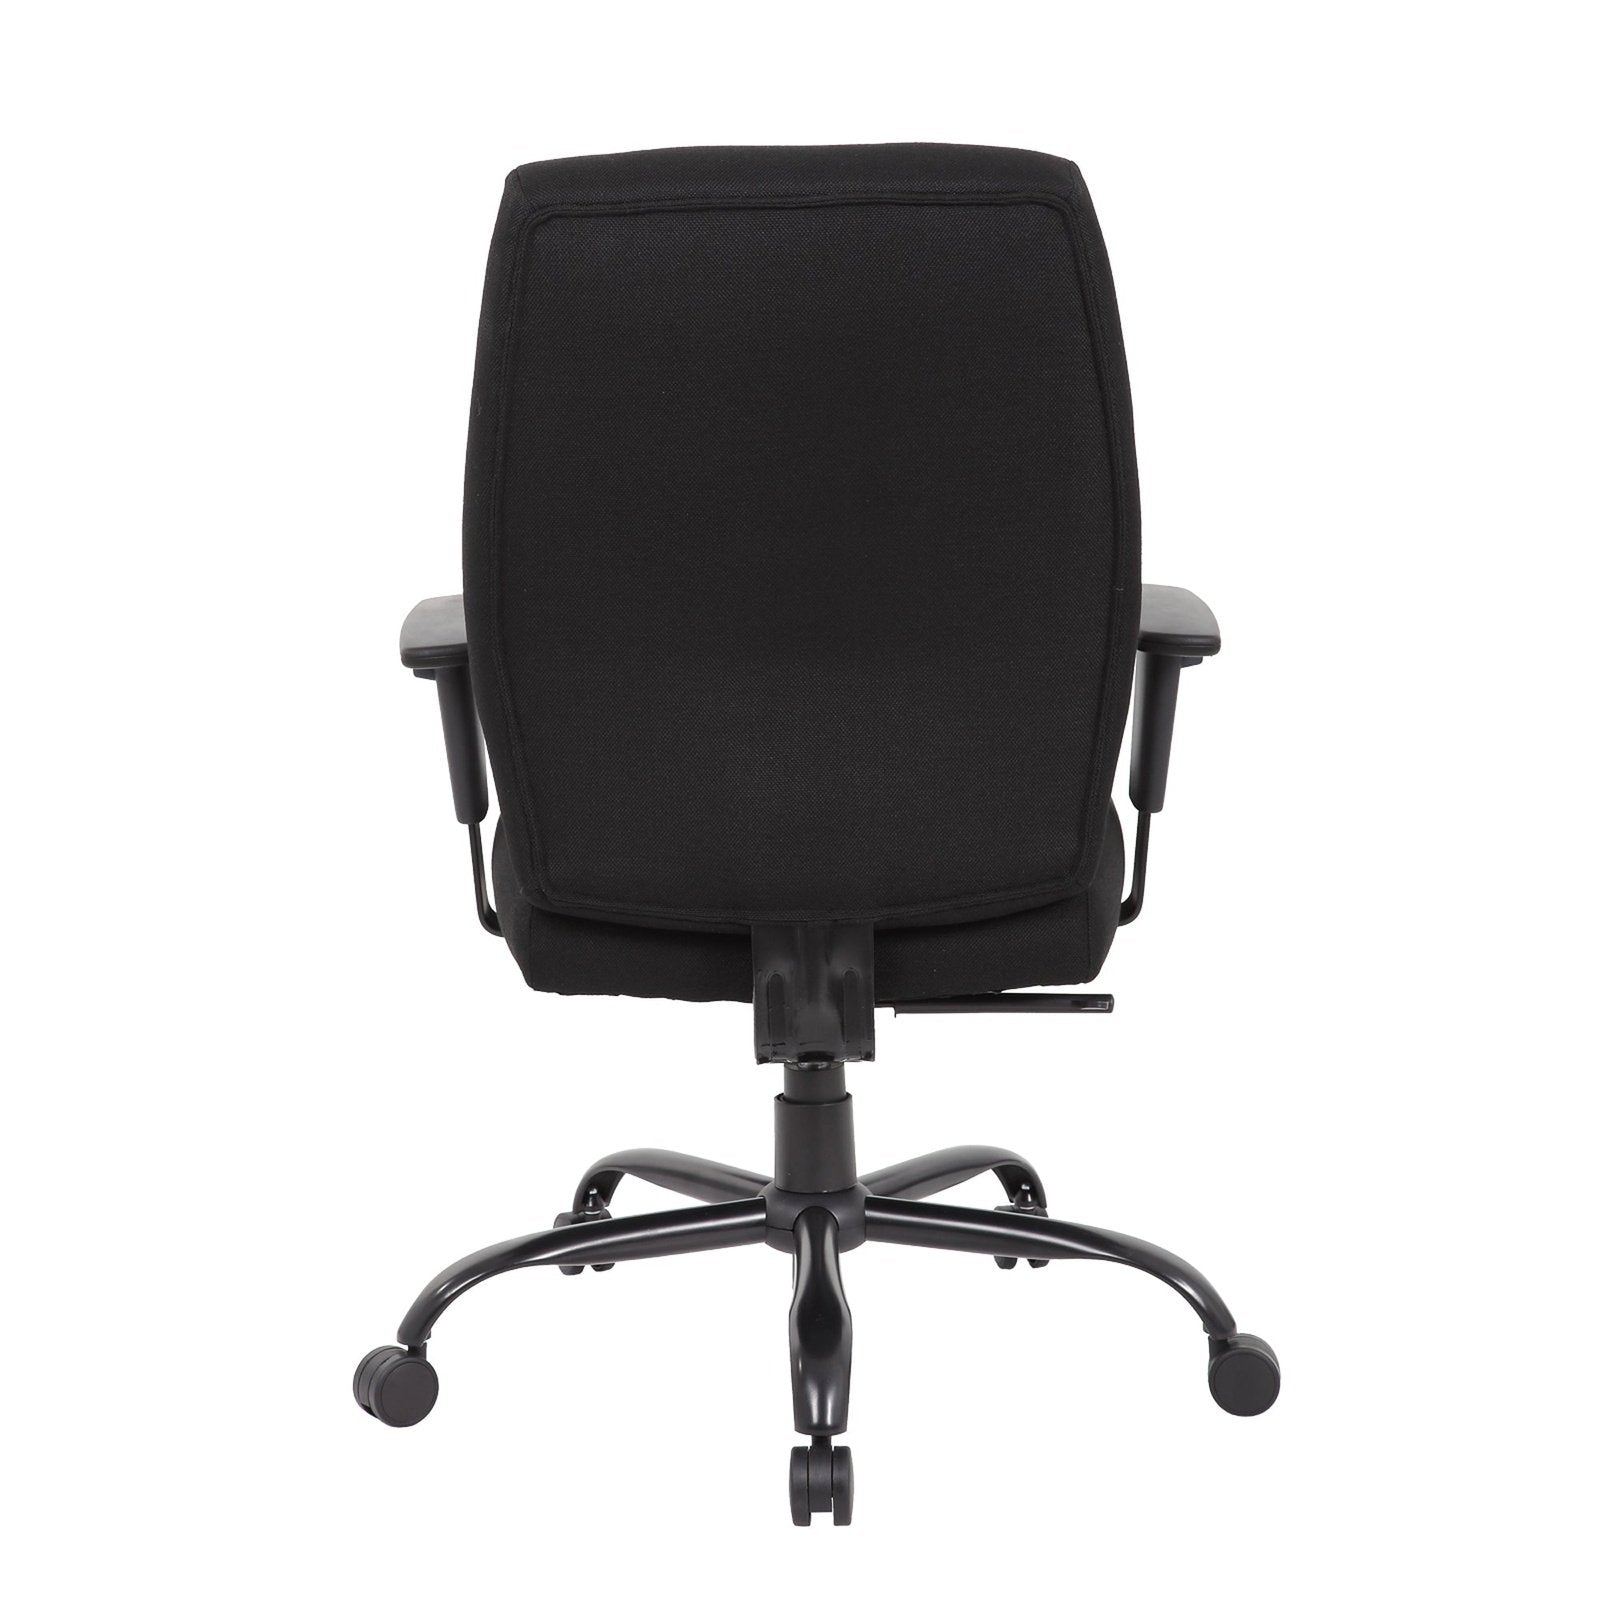 Porter bariatric operator chair with black fabric seat and back - Office Products Online